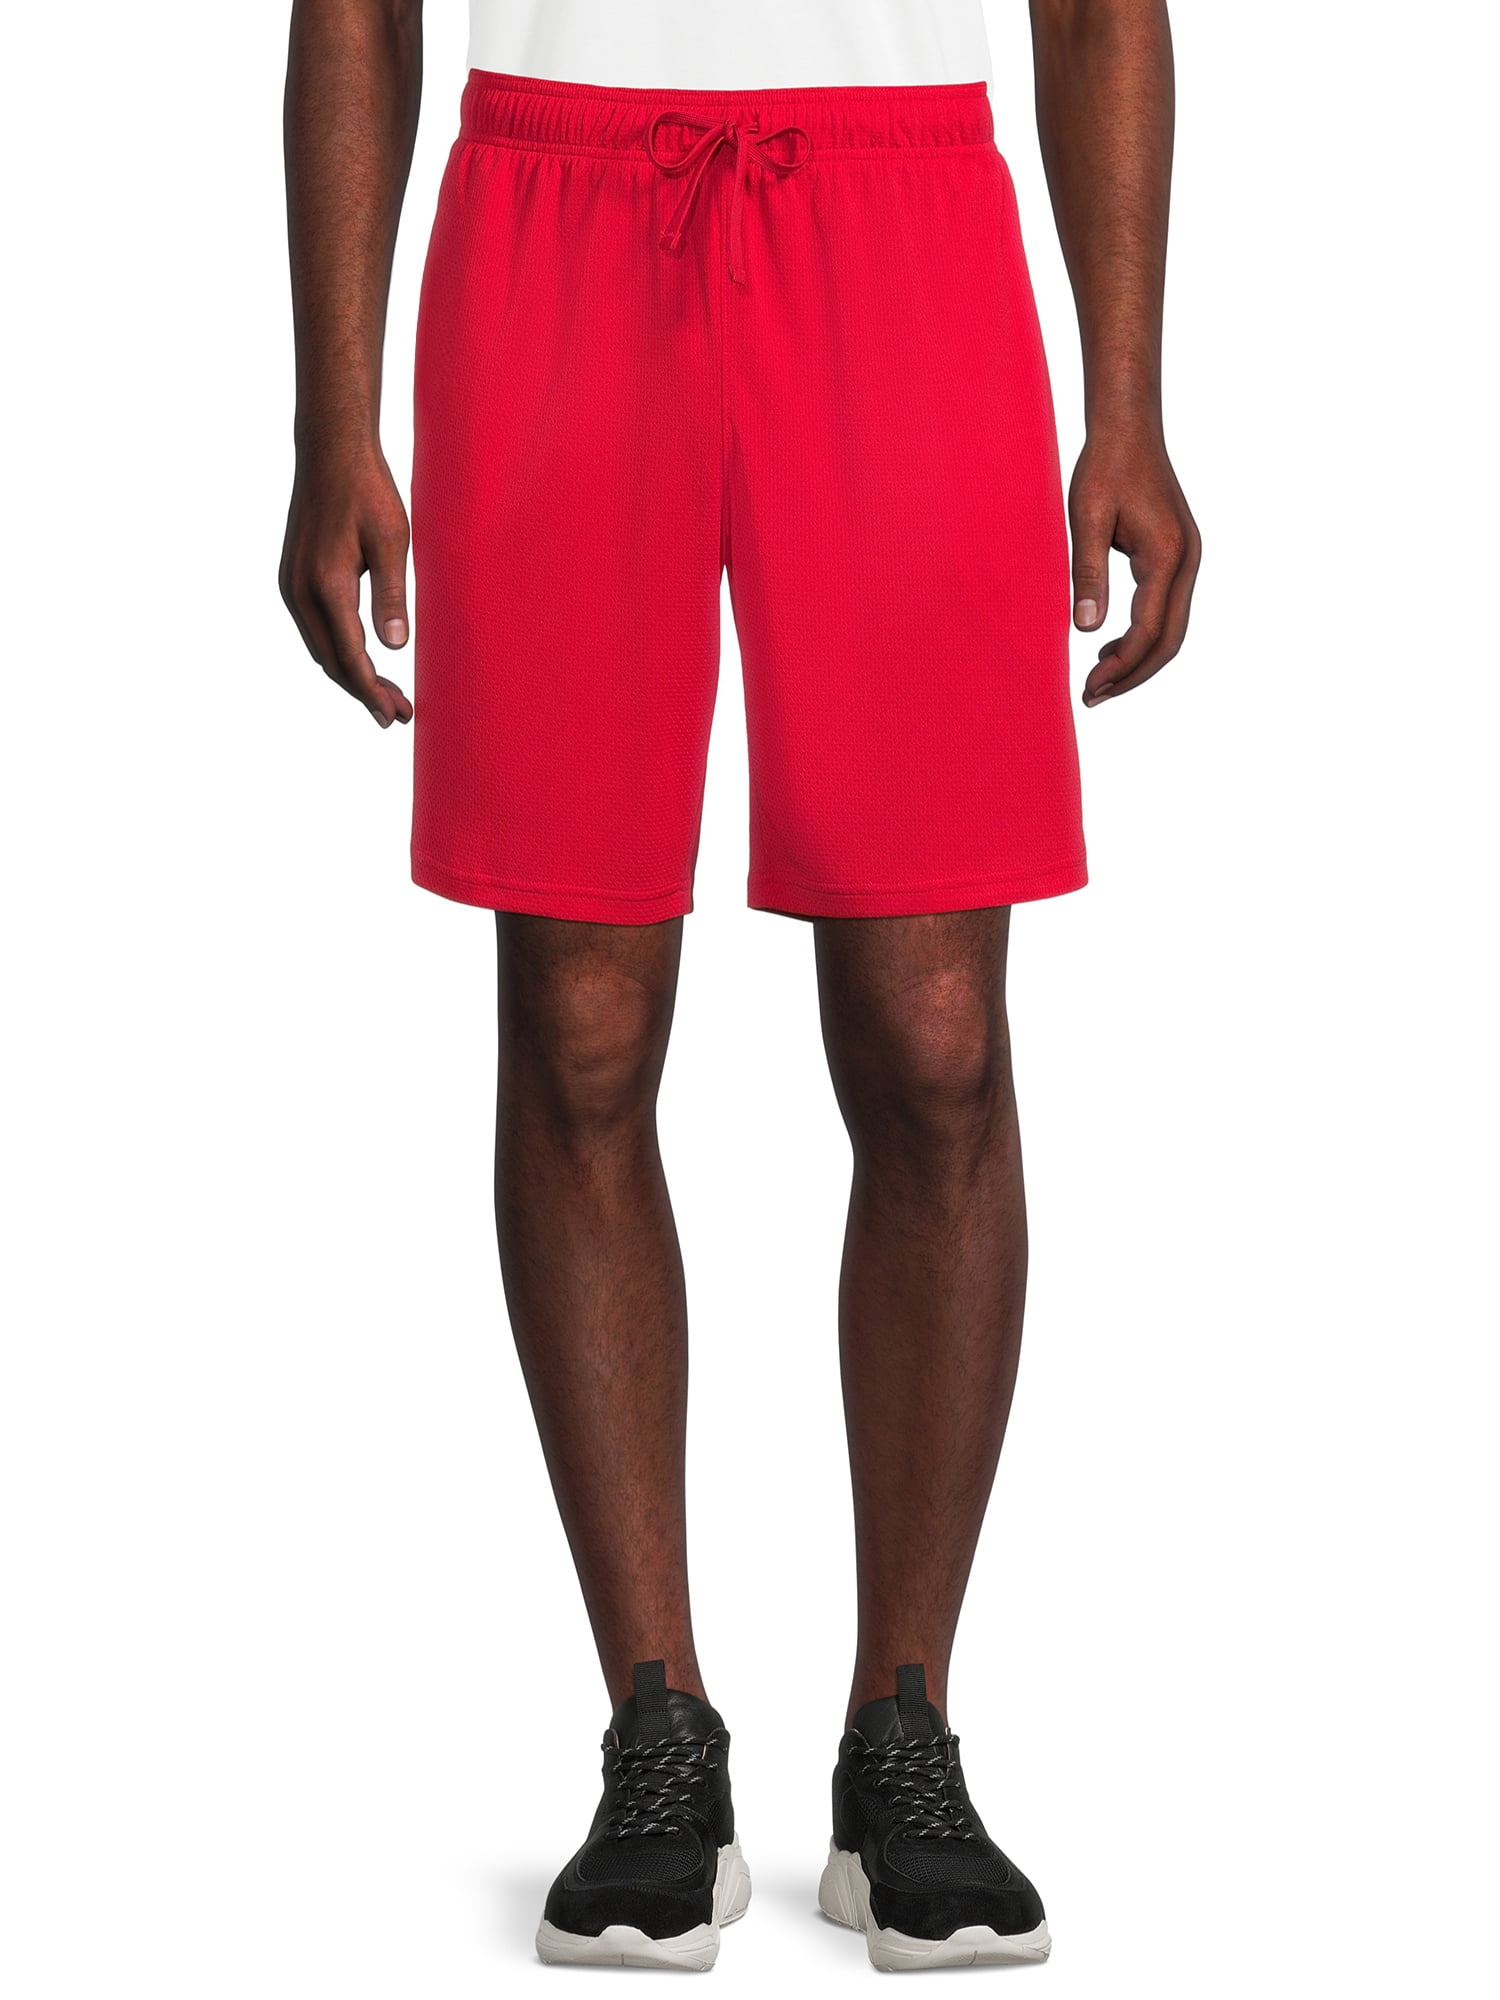 Athletic Works Men's and Big Men's 9" Active Mesh Shorts, up to Size 5XL